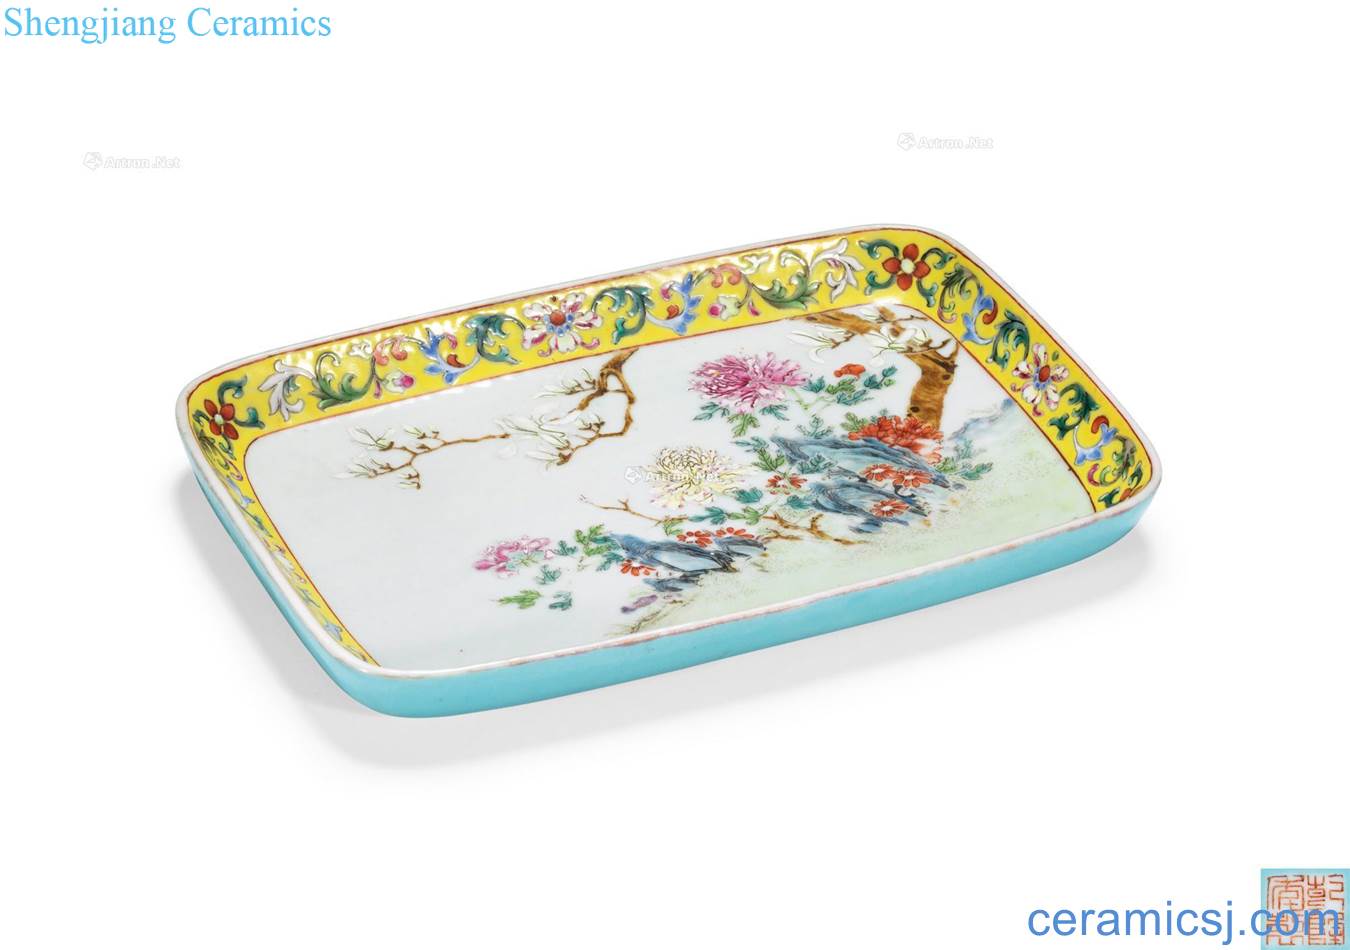 Qing qianlong to pastel yellow flower medallion figure rectangular plate CV 18 with a silver spoon in her mouth